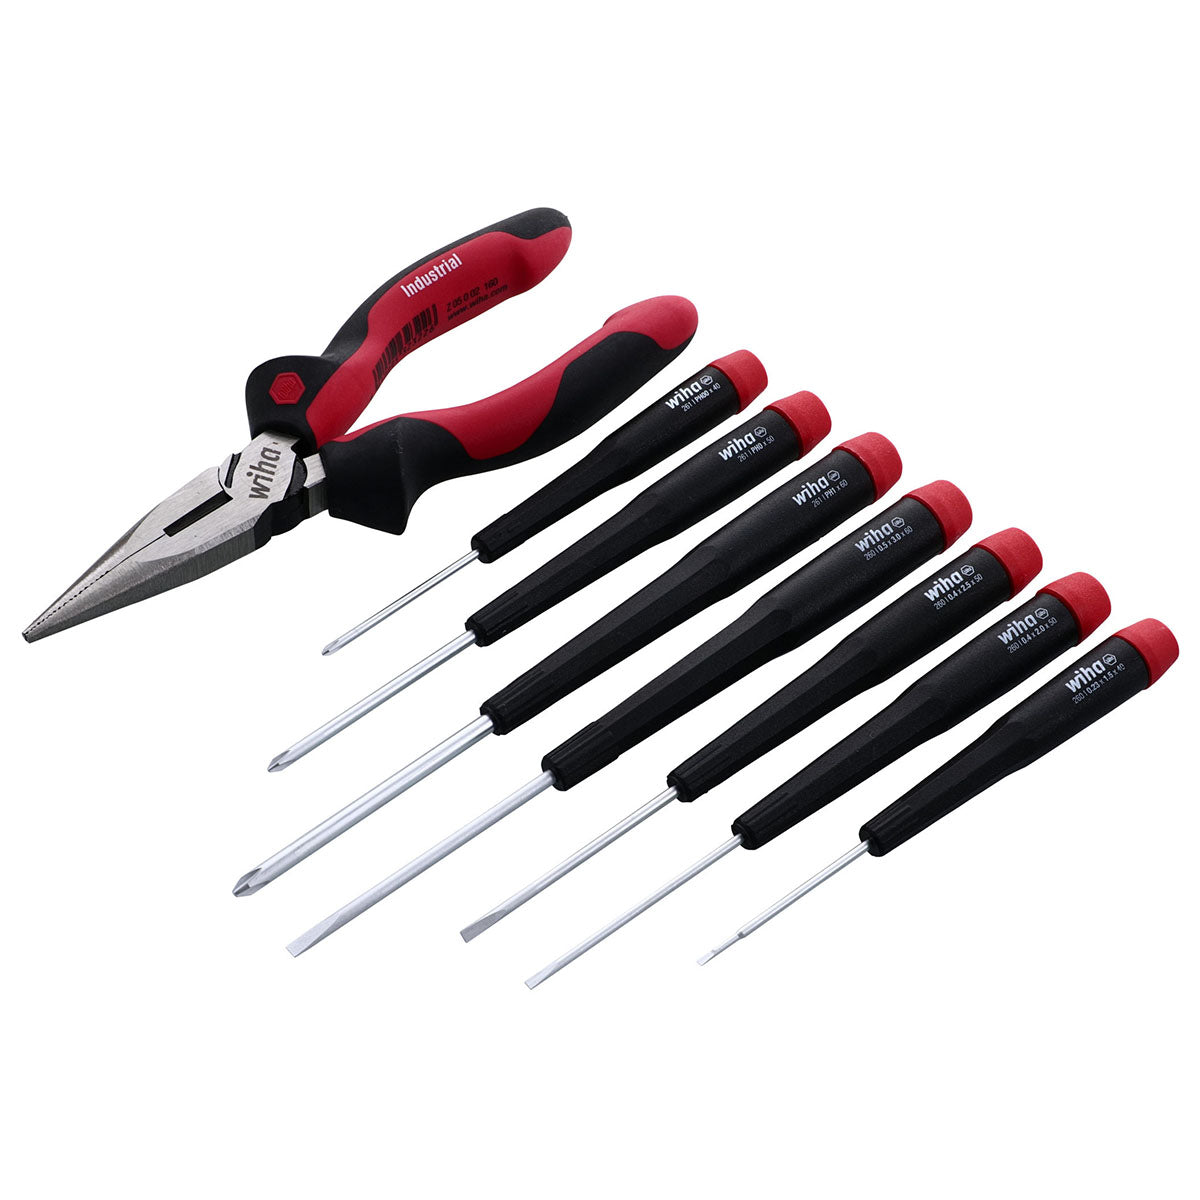 Wiha Precision Slotted Phillips Screwdrivers And Pliers Set (8 Piece Set)